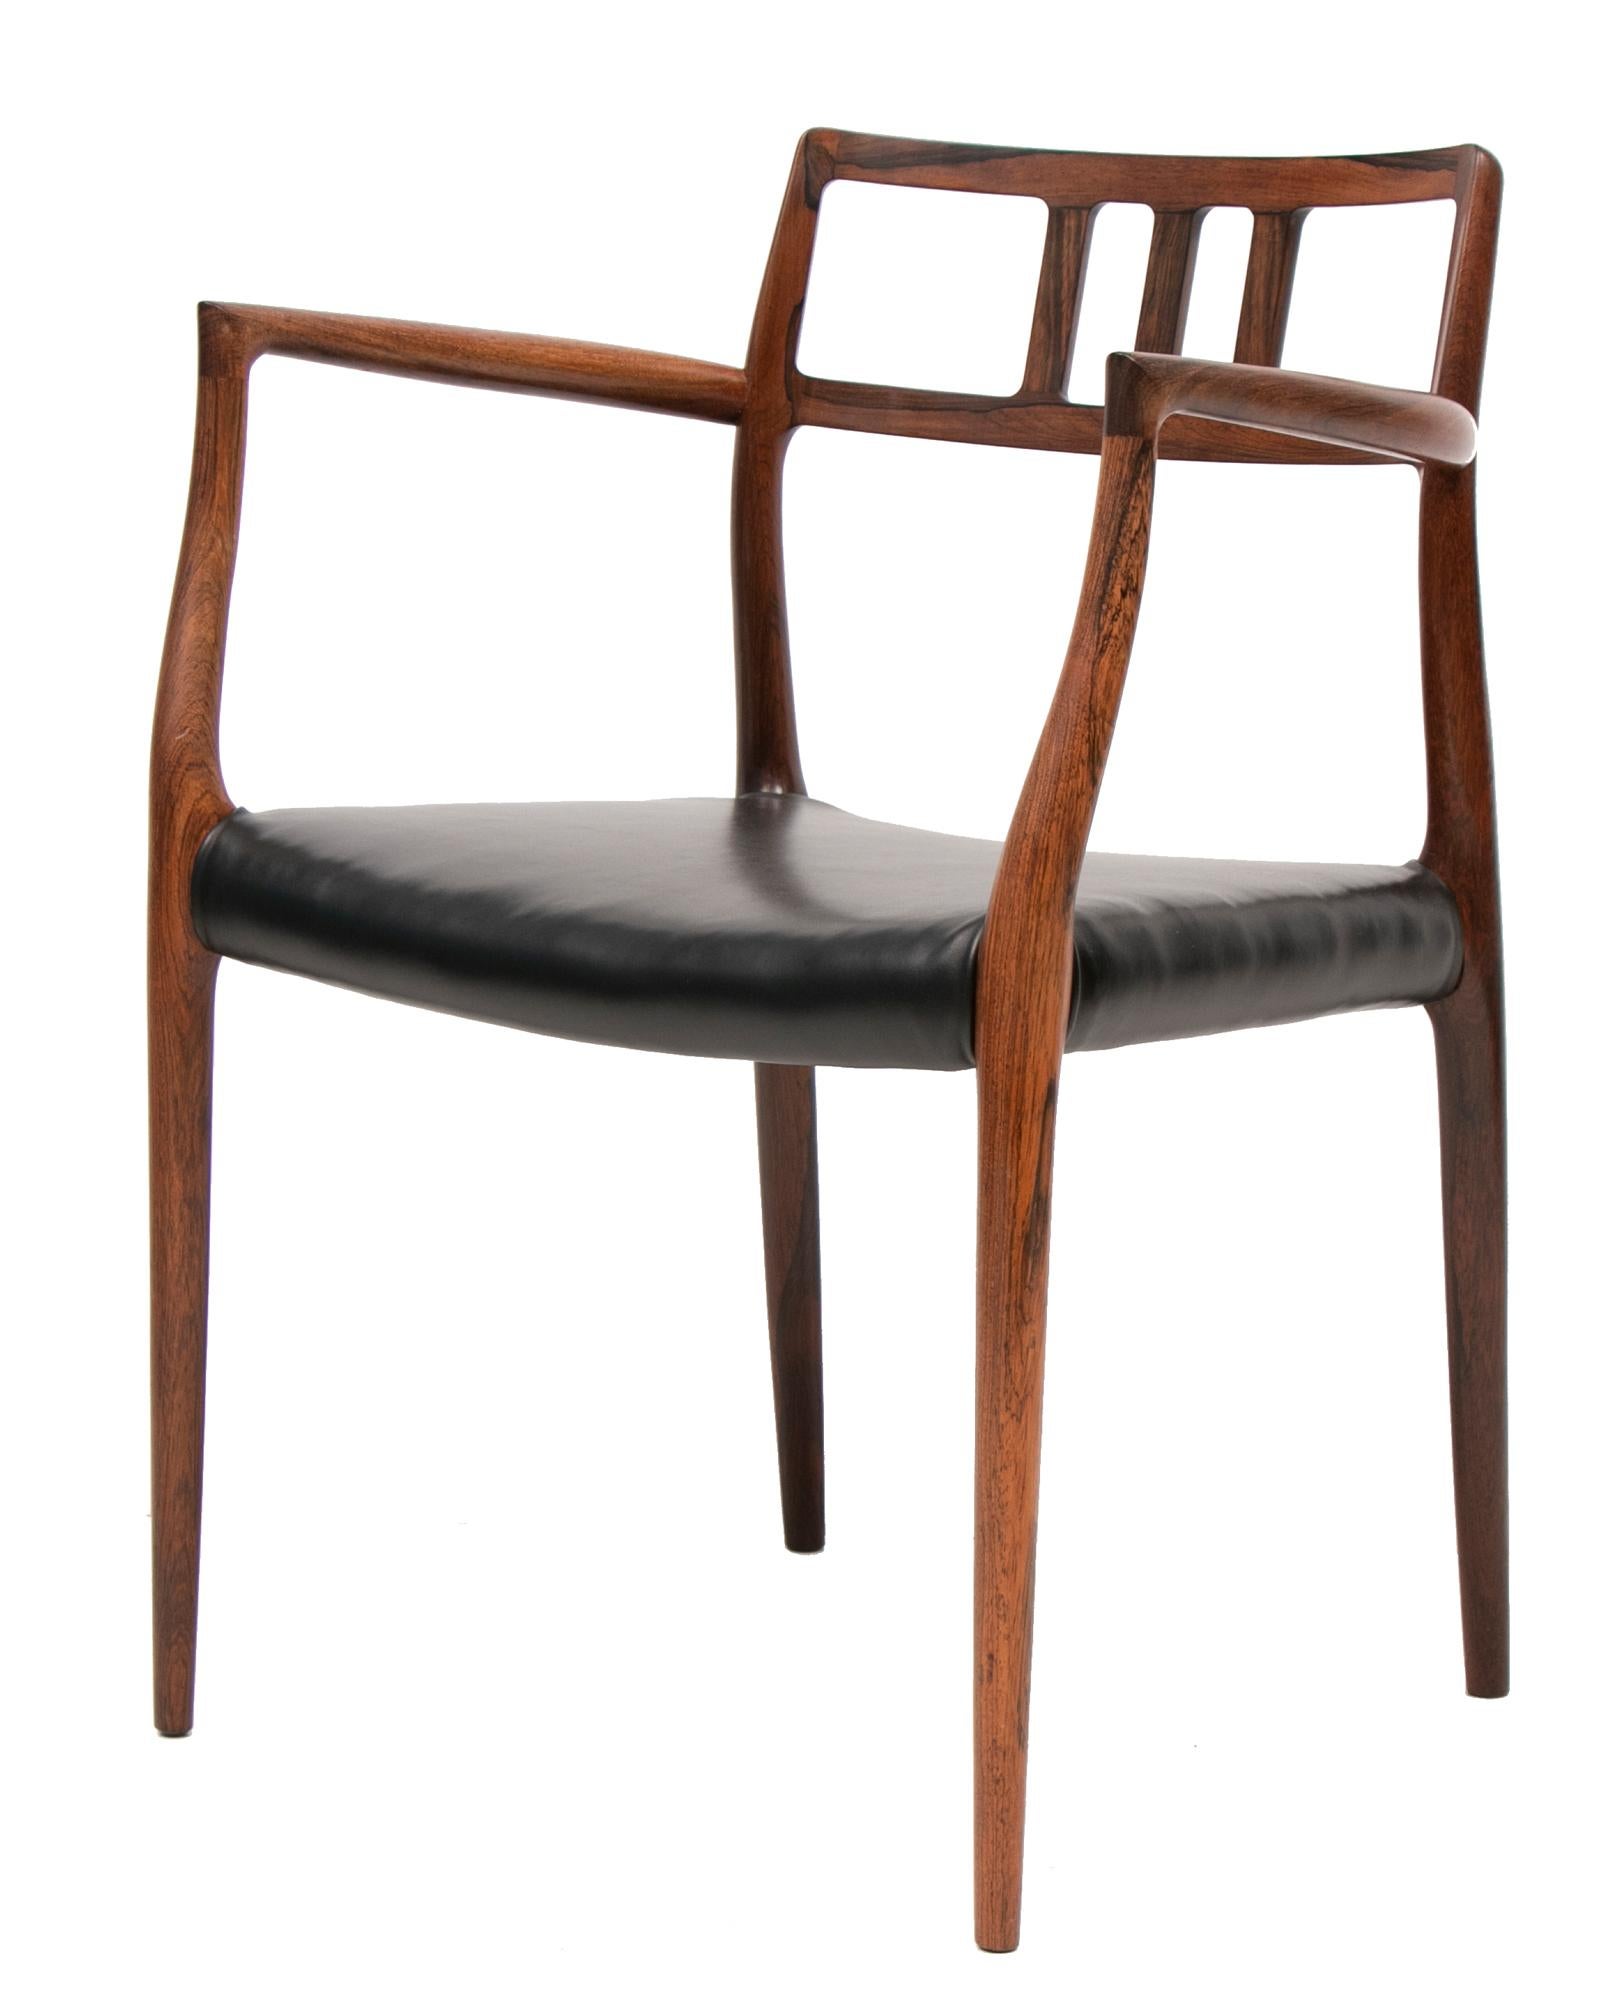 An absolutely gorgeous Danish midcentury rosewood and leather armchair Model 64 designed in 1966 by Niels O. Møller for his own workshop J.L Møller. The chair has been fully restored and reupholstered with premium quality black leather. Makers mark